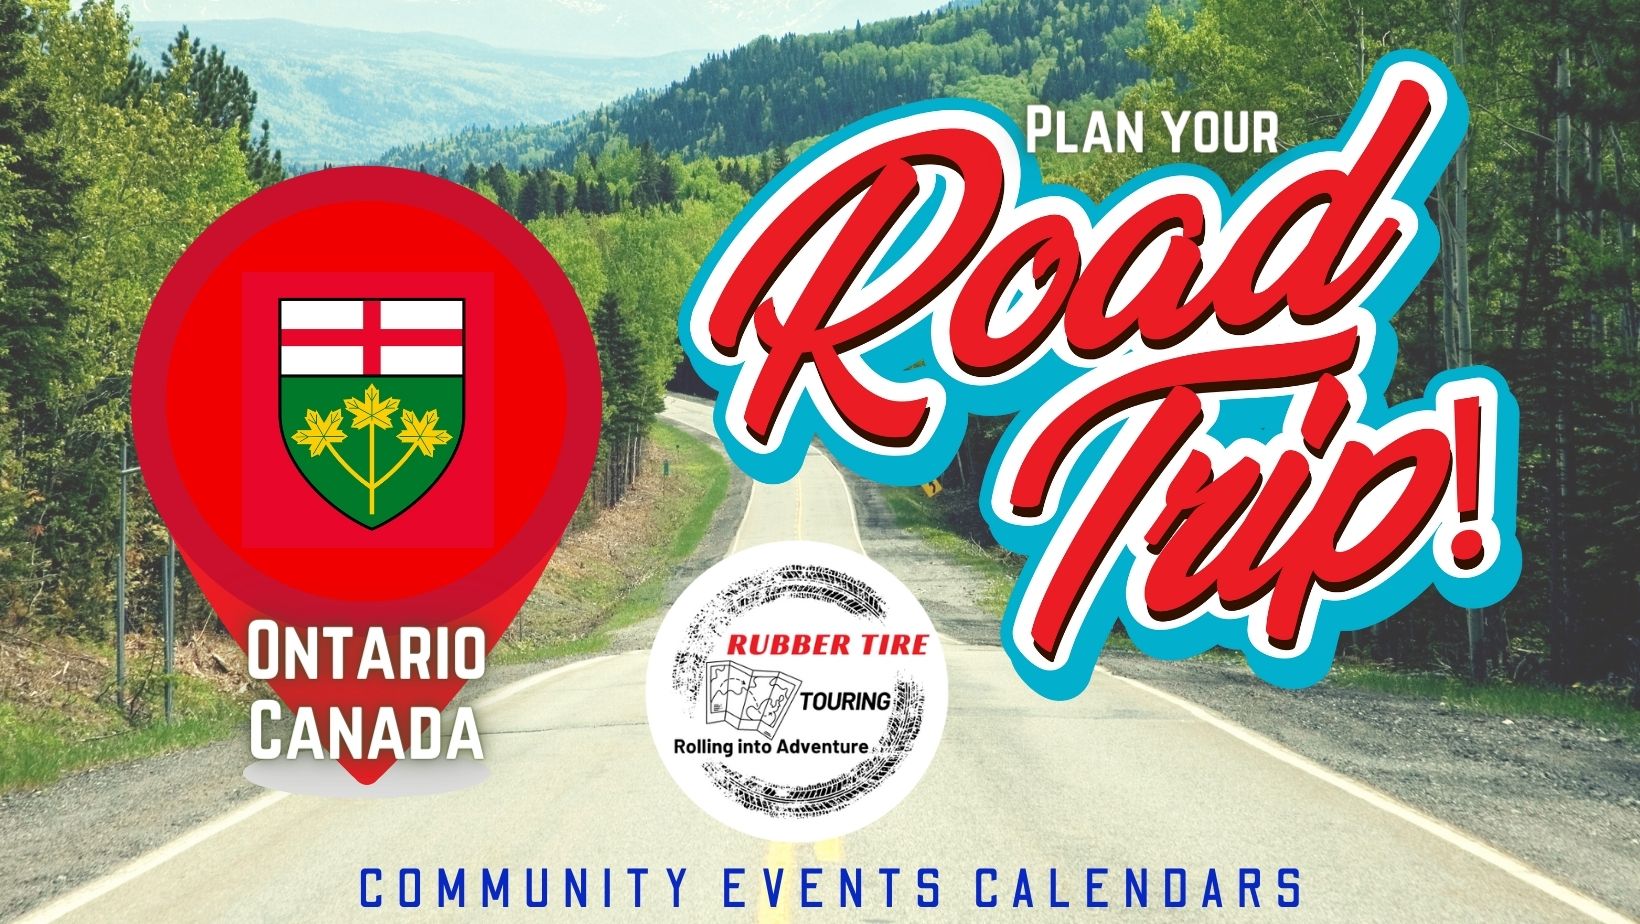 ON Events Calendar - Plan your road trip!